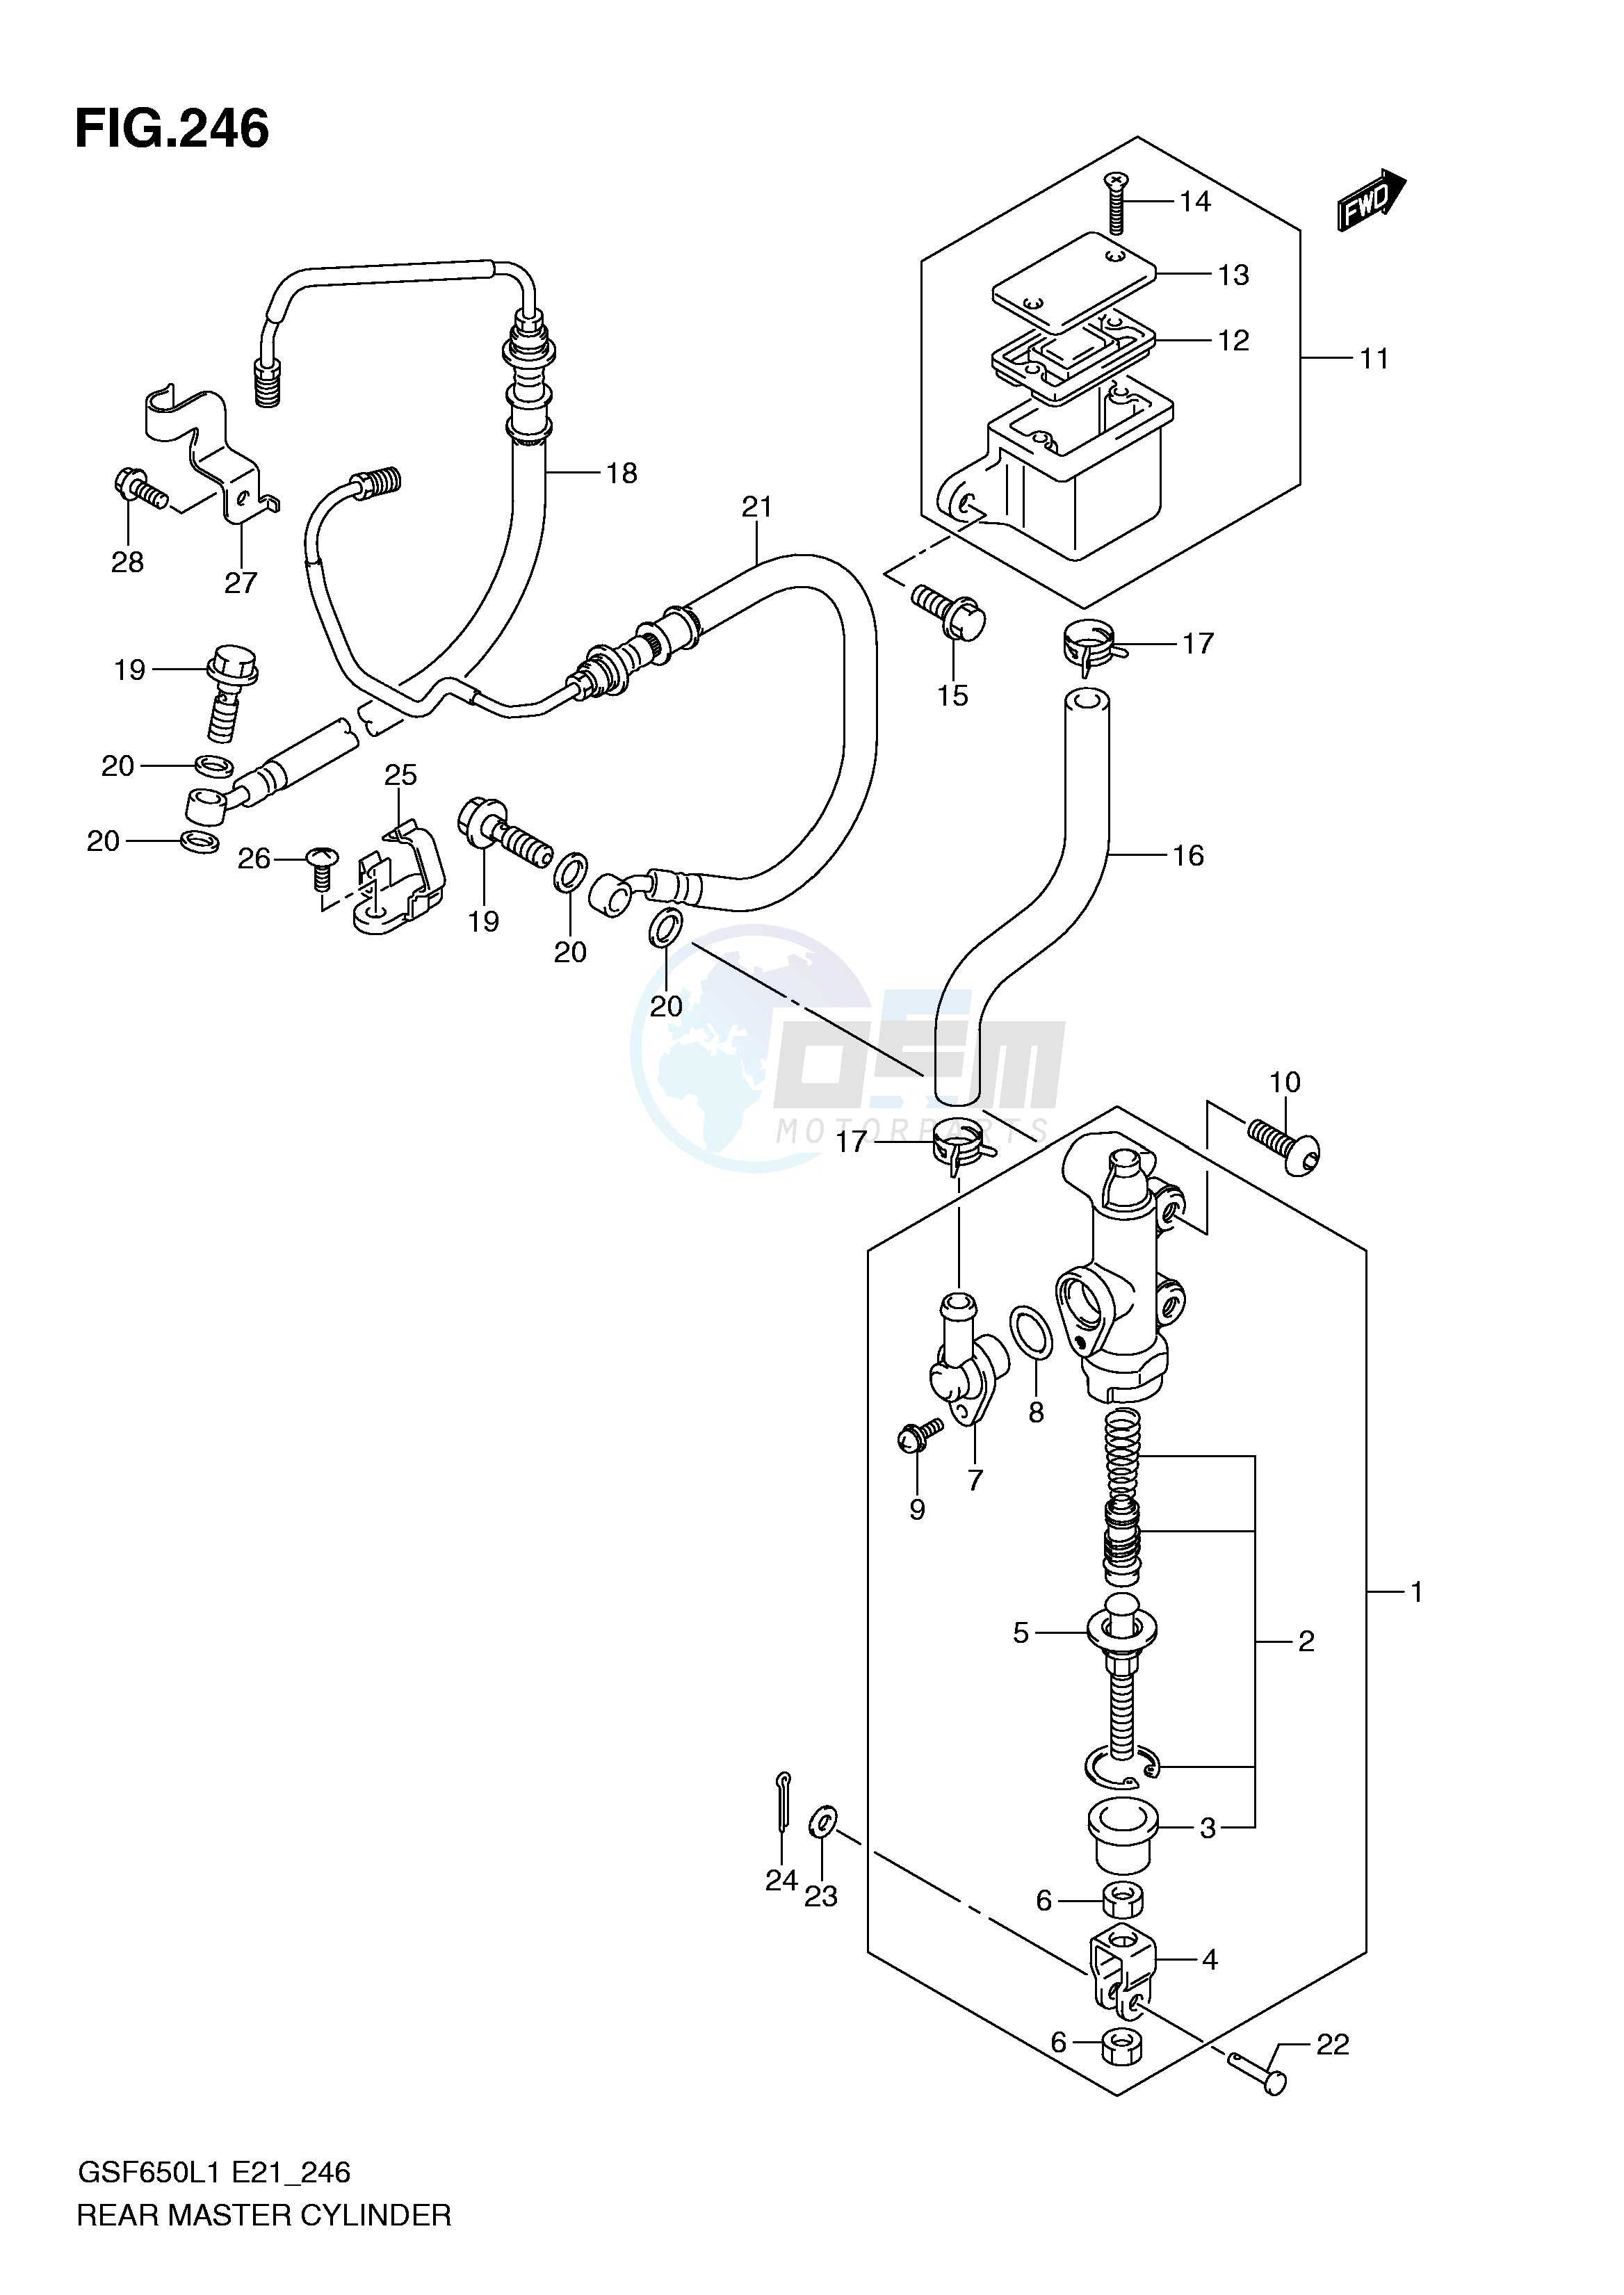 REAR MASTER CYLINDER (GSF650SUAL1 E21) blueprint